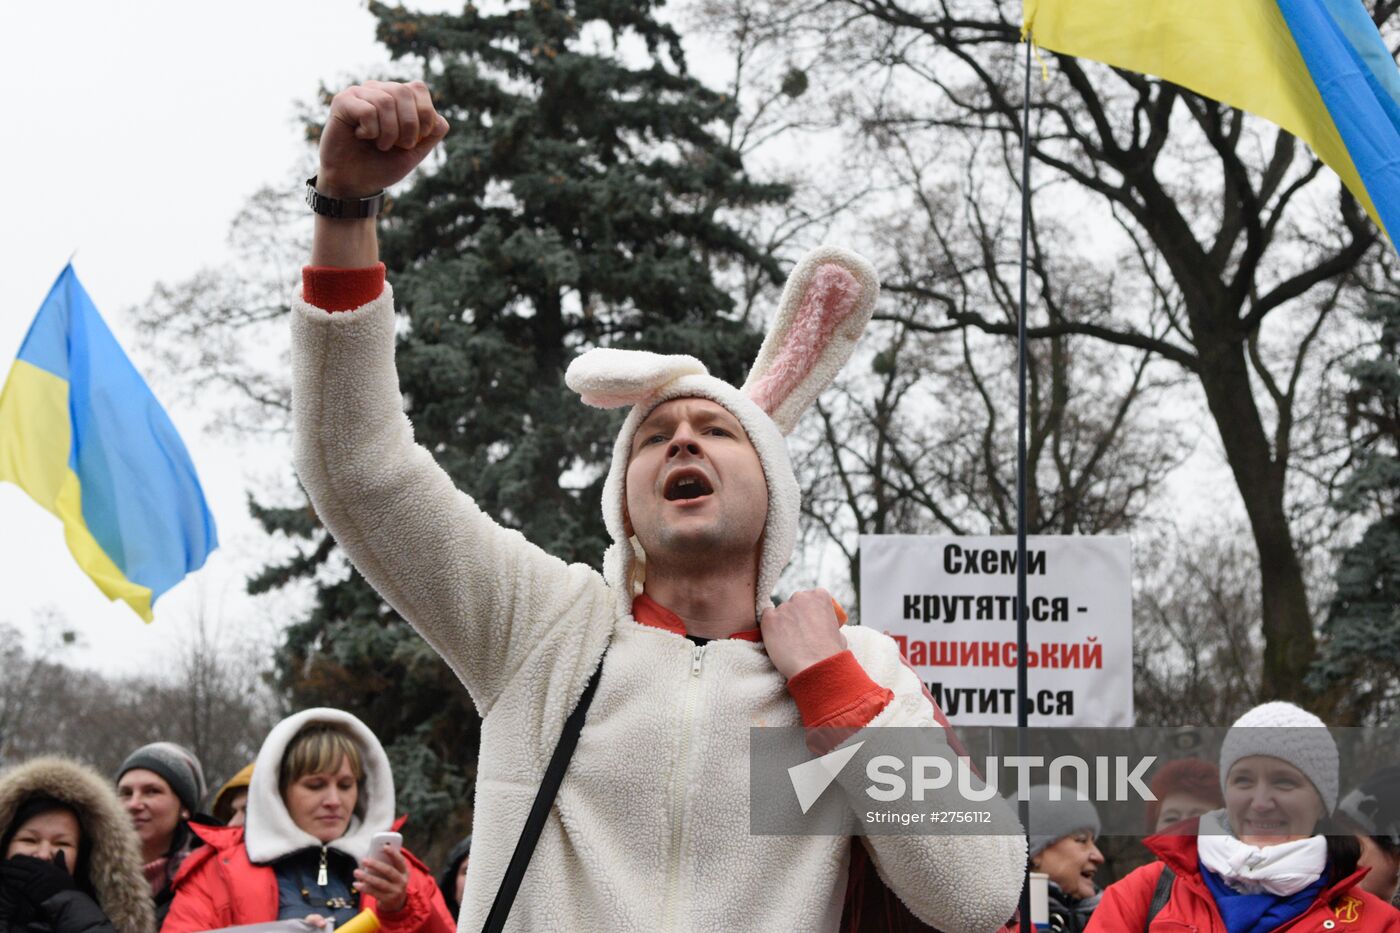 Protesters call for Ukraine's government to step down